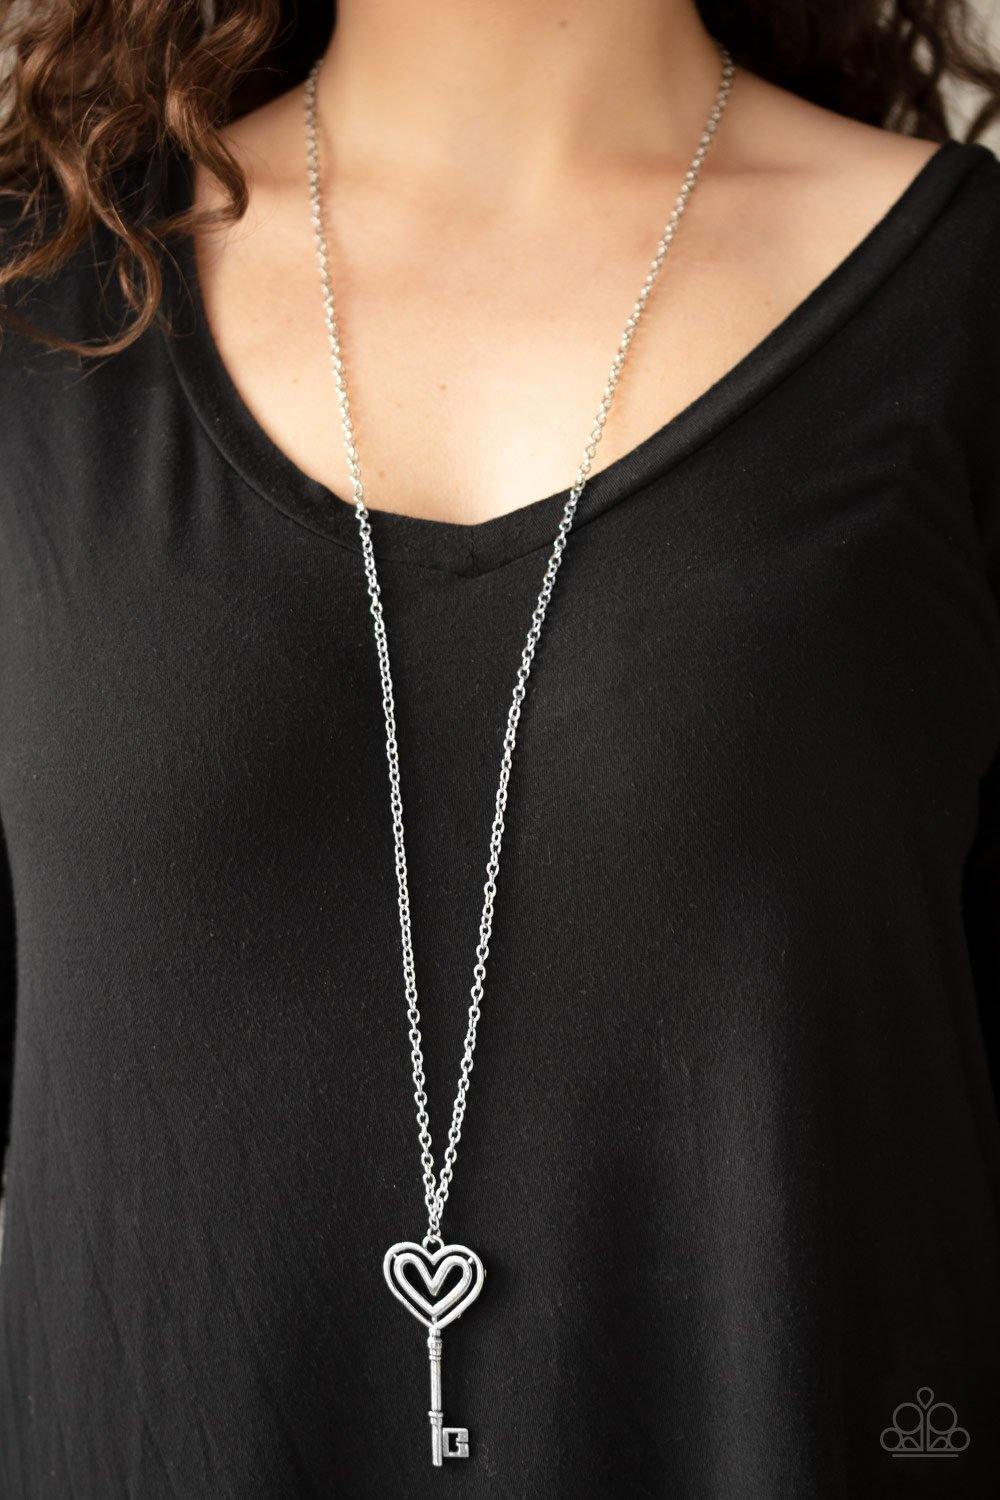 Unlock My Heart - Silver Necklace - Paparazzi Accessories - Sassysblingandthings